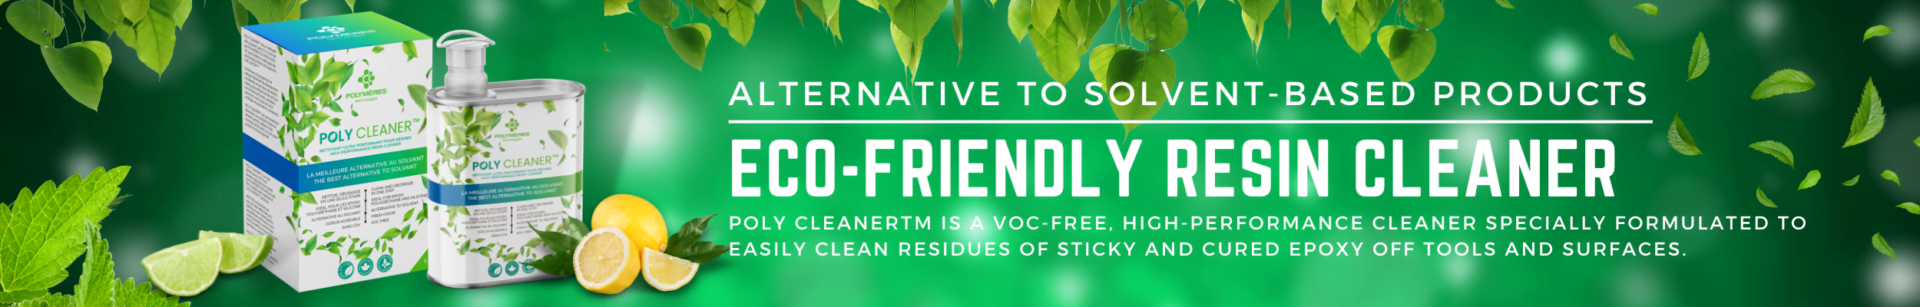 Eco-Friendly resin Cleaner Solvent Free